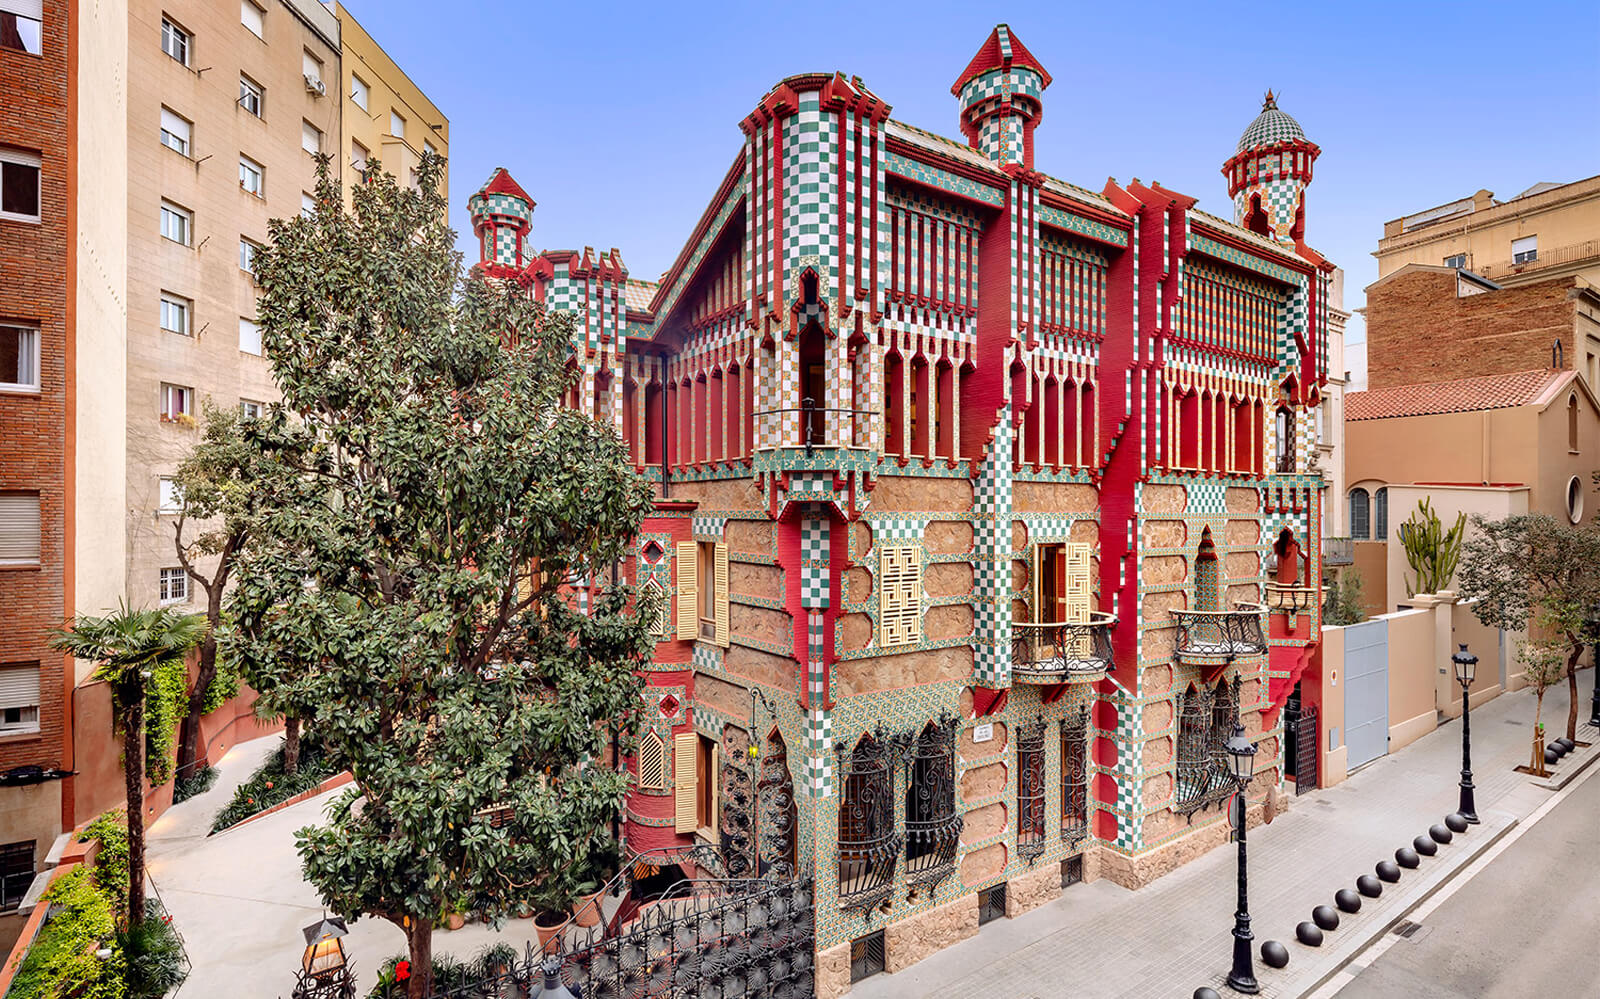 Image of Casa Vicens - Gaudi's First House